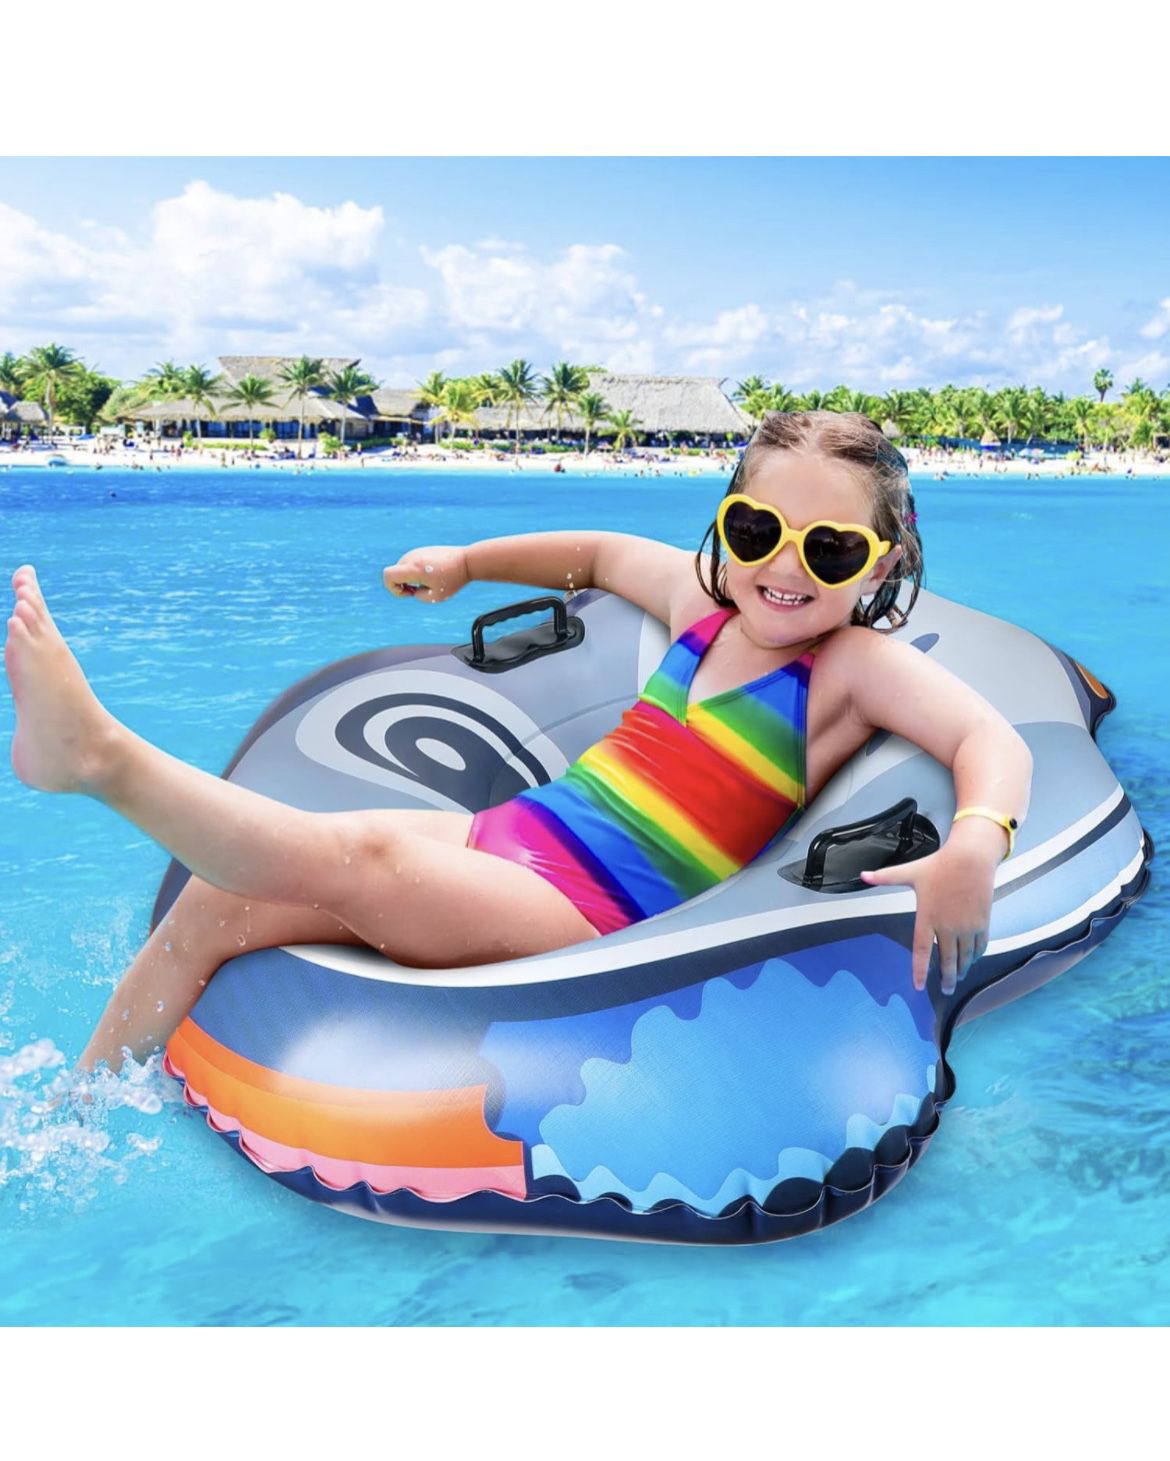 Pool Floats, 47" Inflatable Owl River Tubes with Handles